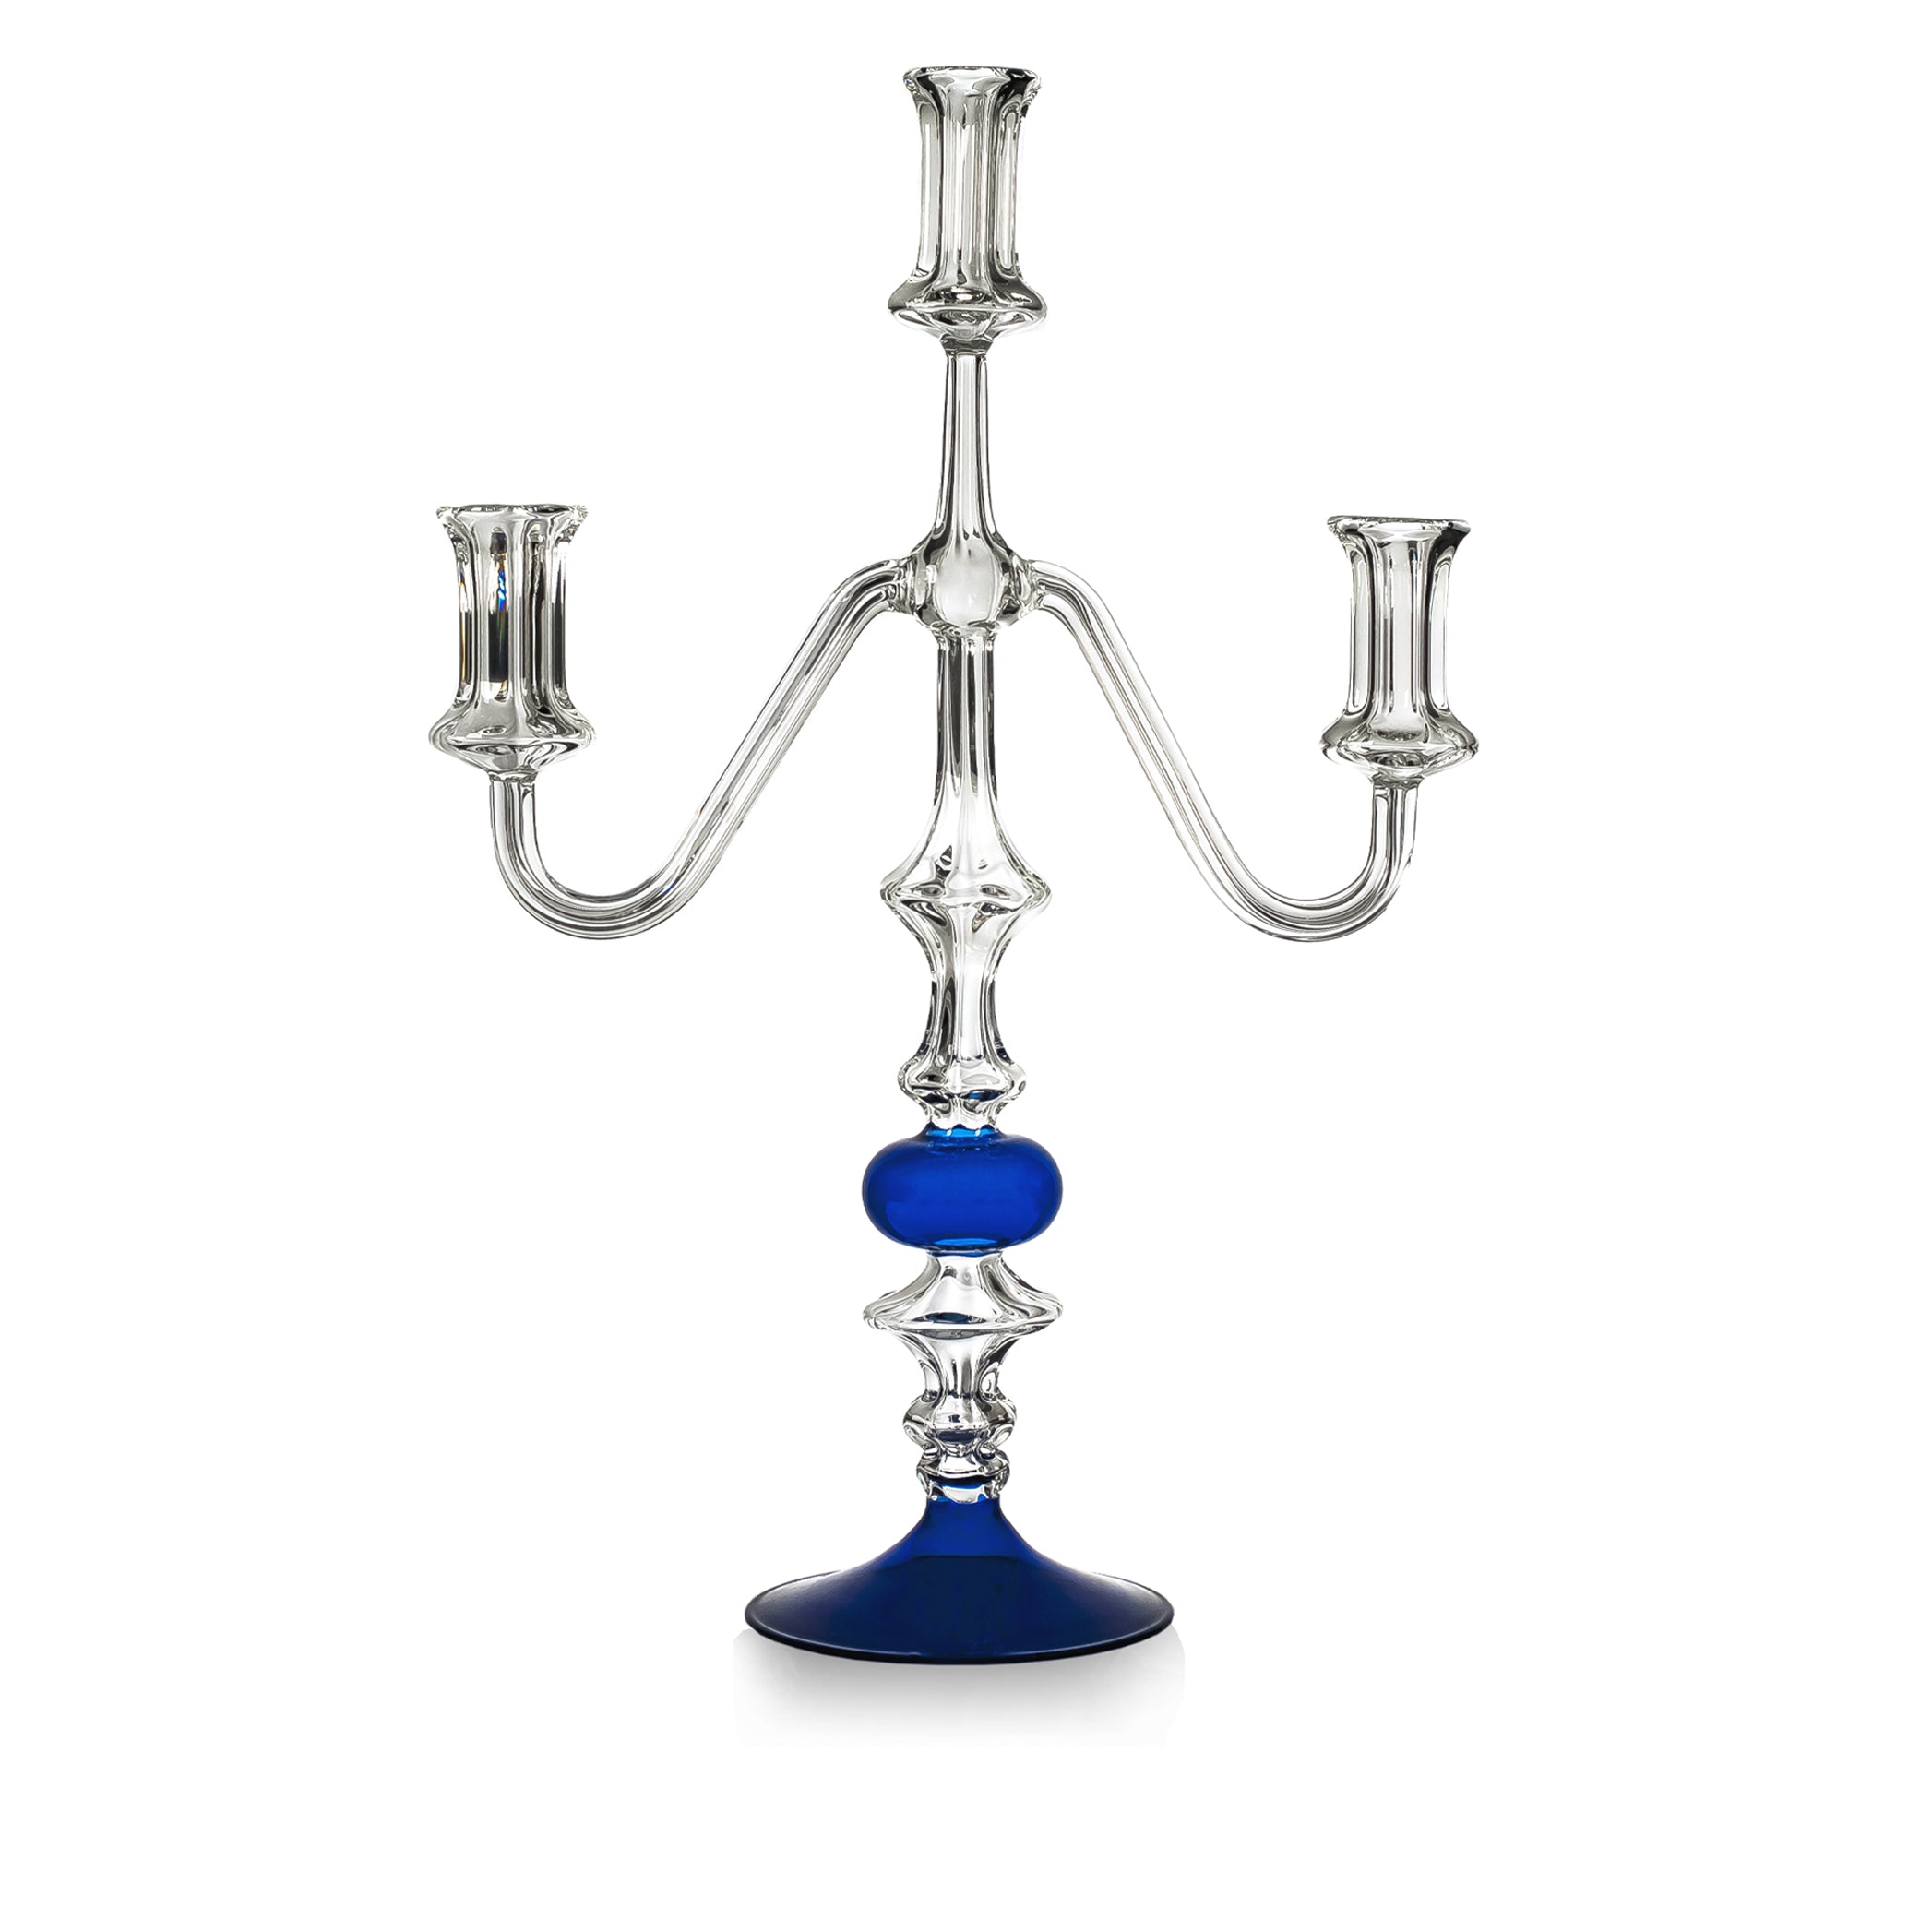 Lucia Three Candles Candelabra in Blue